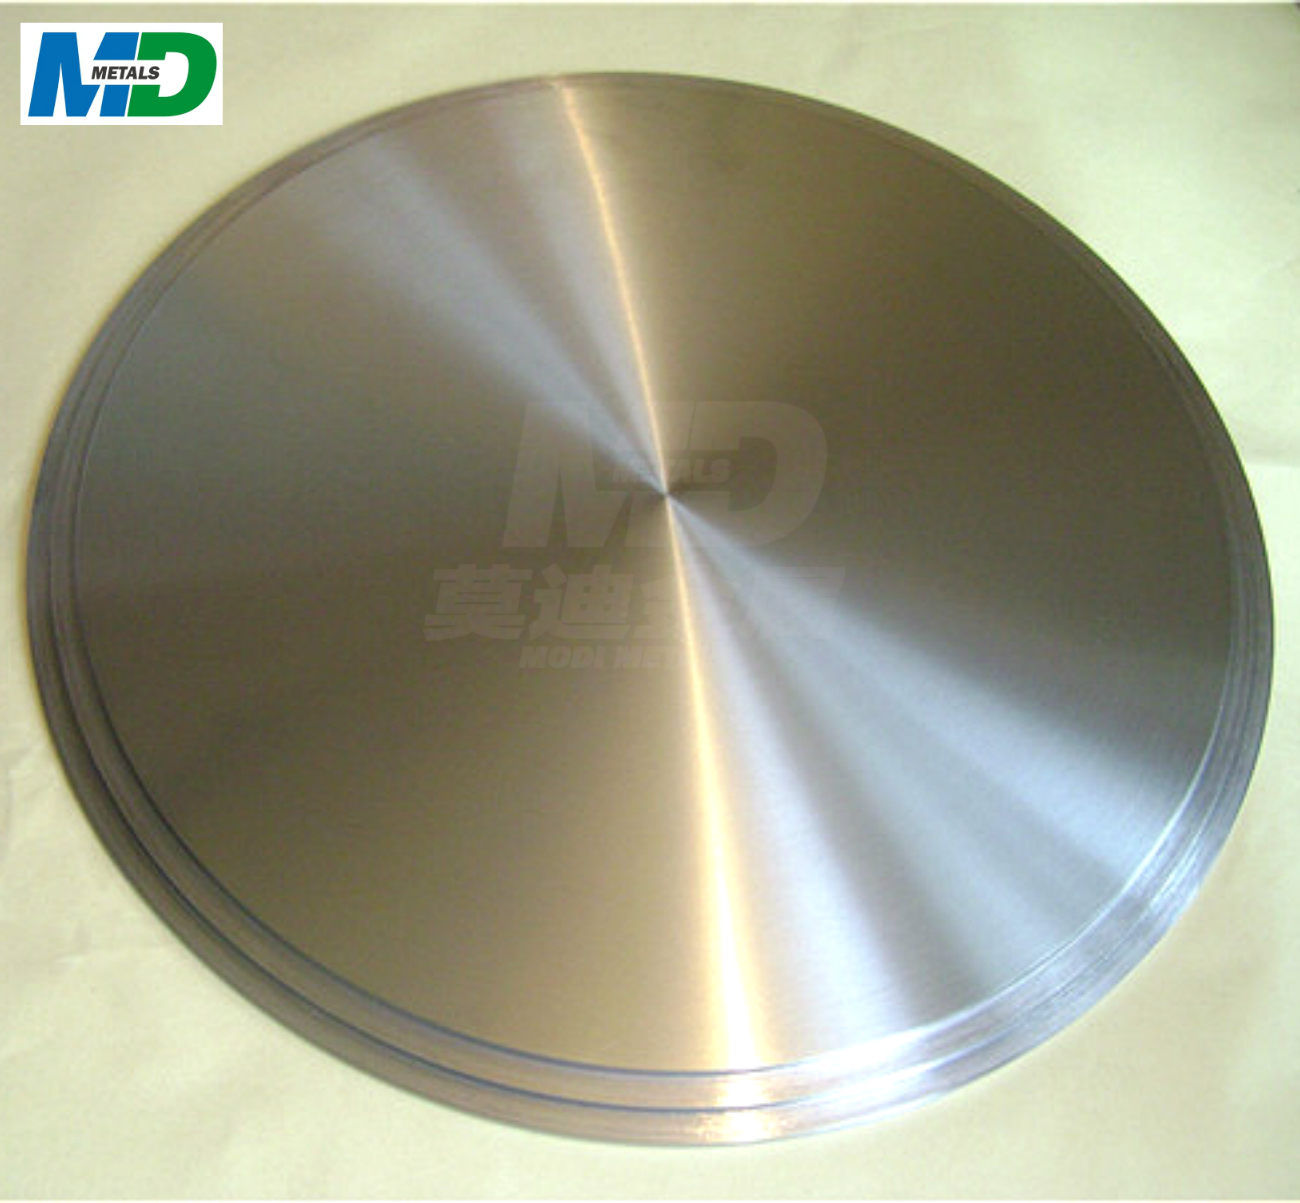 Tzm Molybdenum Alloy Plate Sputtering Targets Price